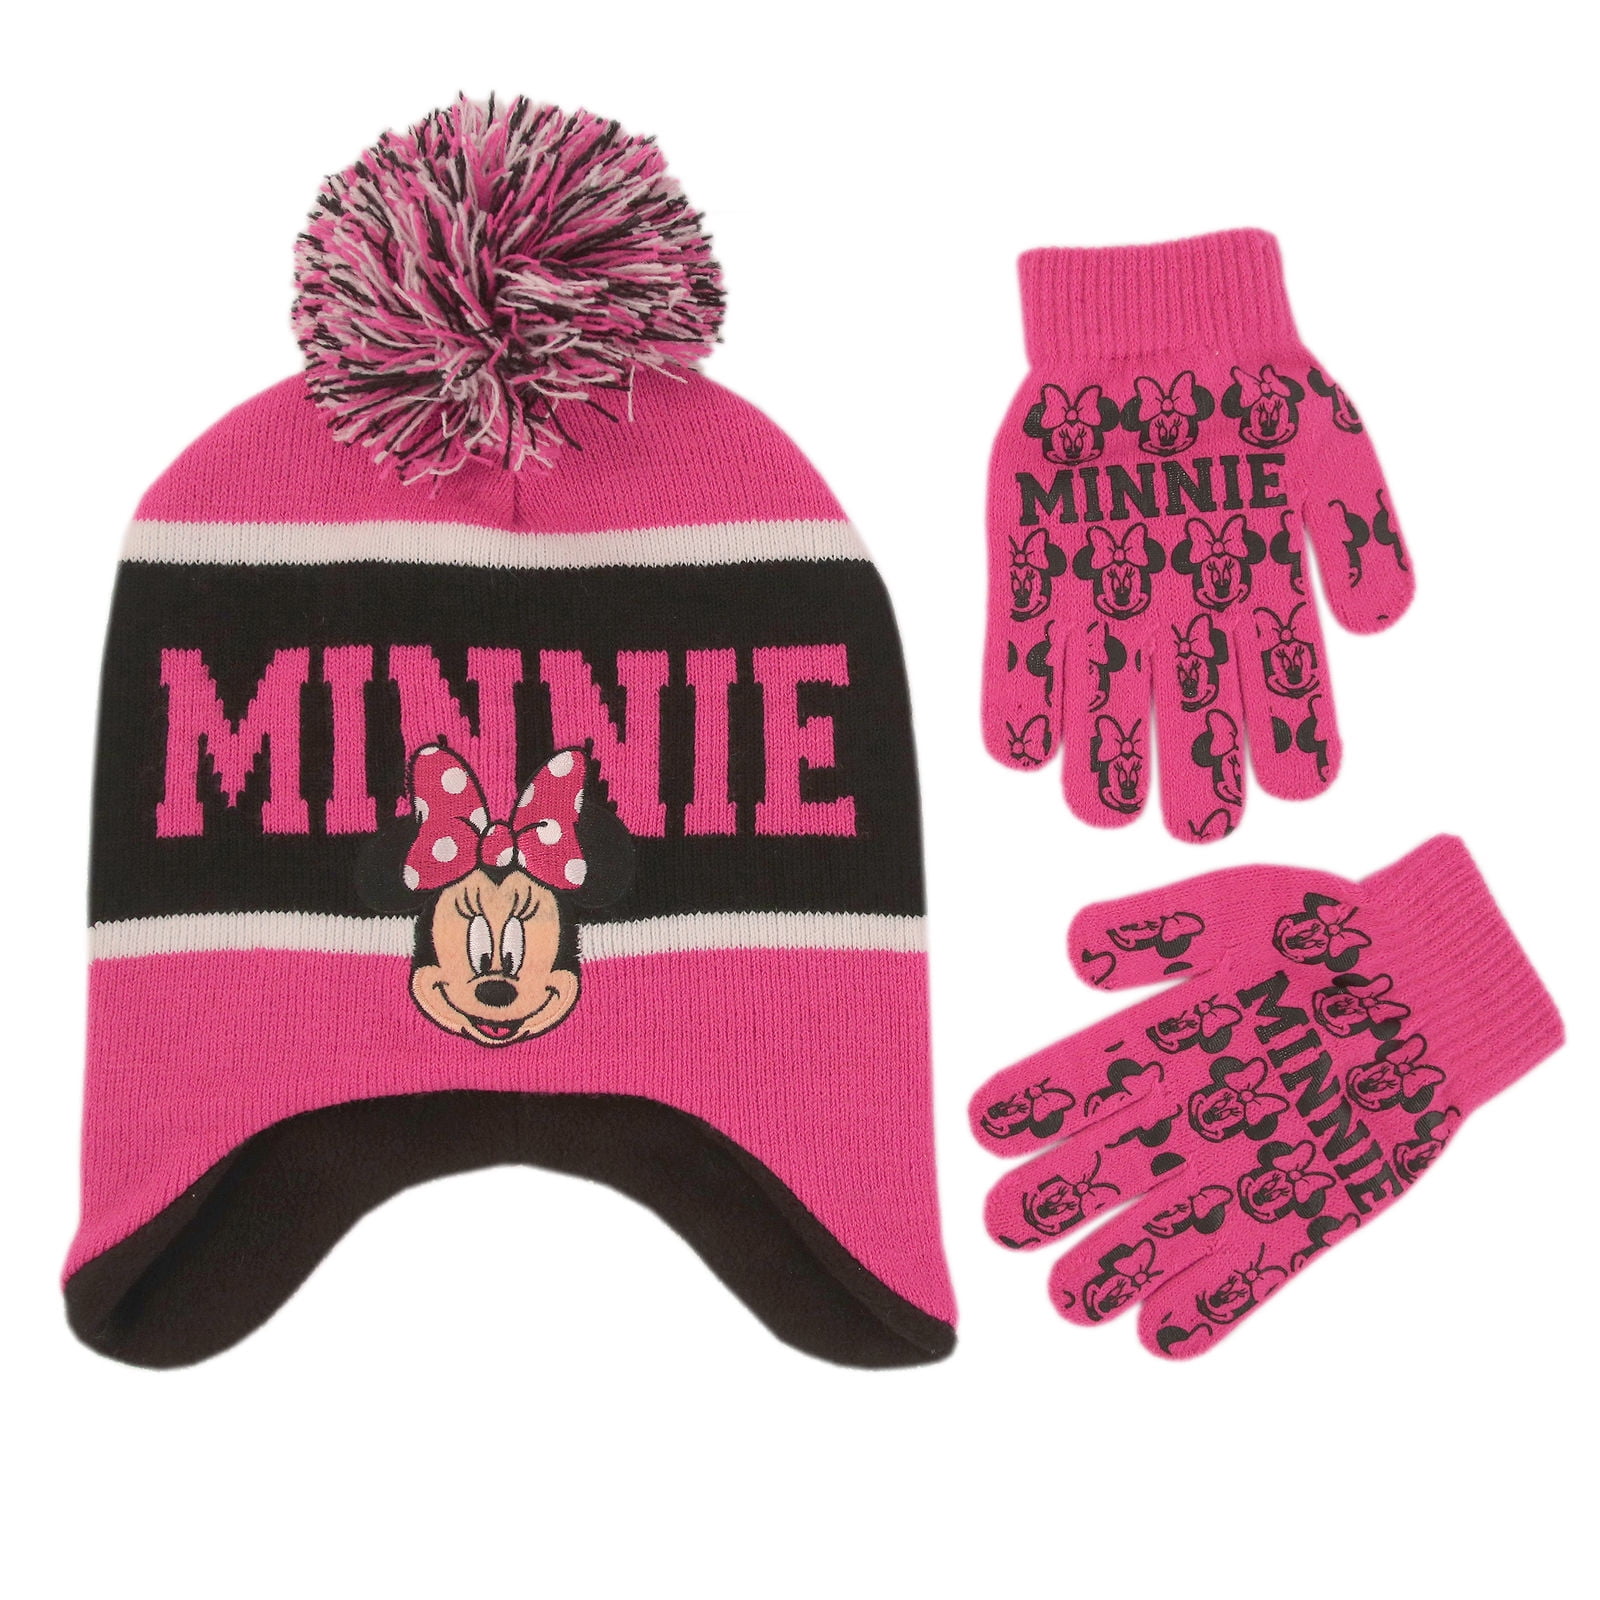 GIRLS DISNEY MINNIE MOUSE CHARACTER WINTER HAT,GLOVE & SCARF SET GOOD QUALITY 